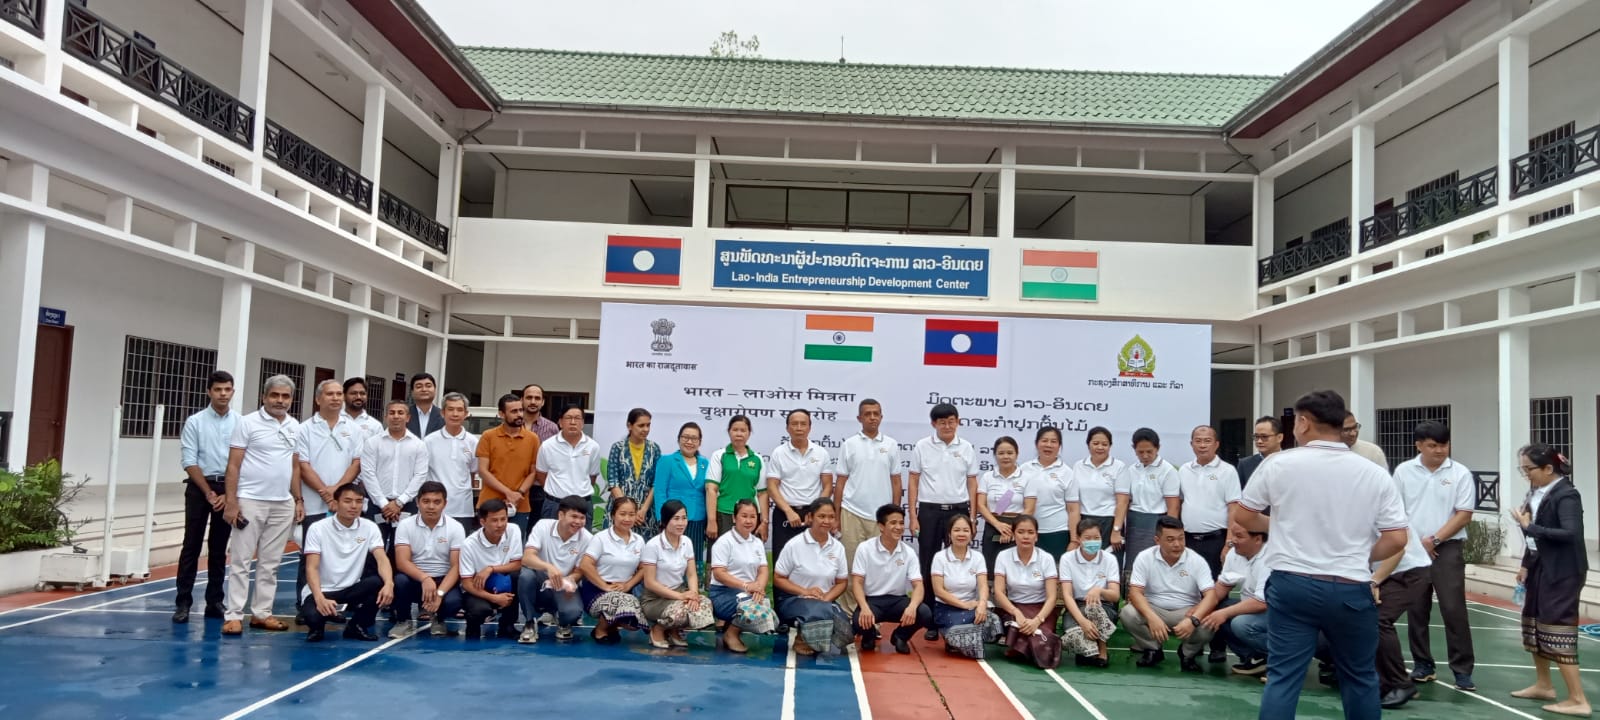 Associate Prof Dr. Phout Simmalavong, Min of Education & Sports & Amb Dinkar Asthana planted trees in premises of Laos-India Entrepreneurship Development Centre (LIEDC) to celebrate National Tree Day of Laos (01 June)